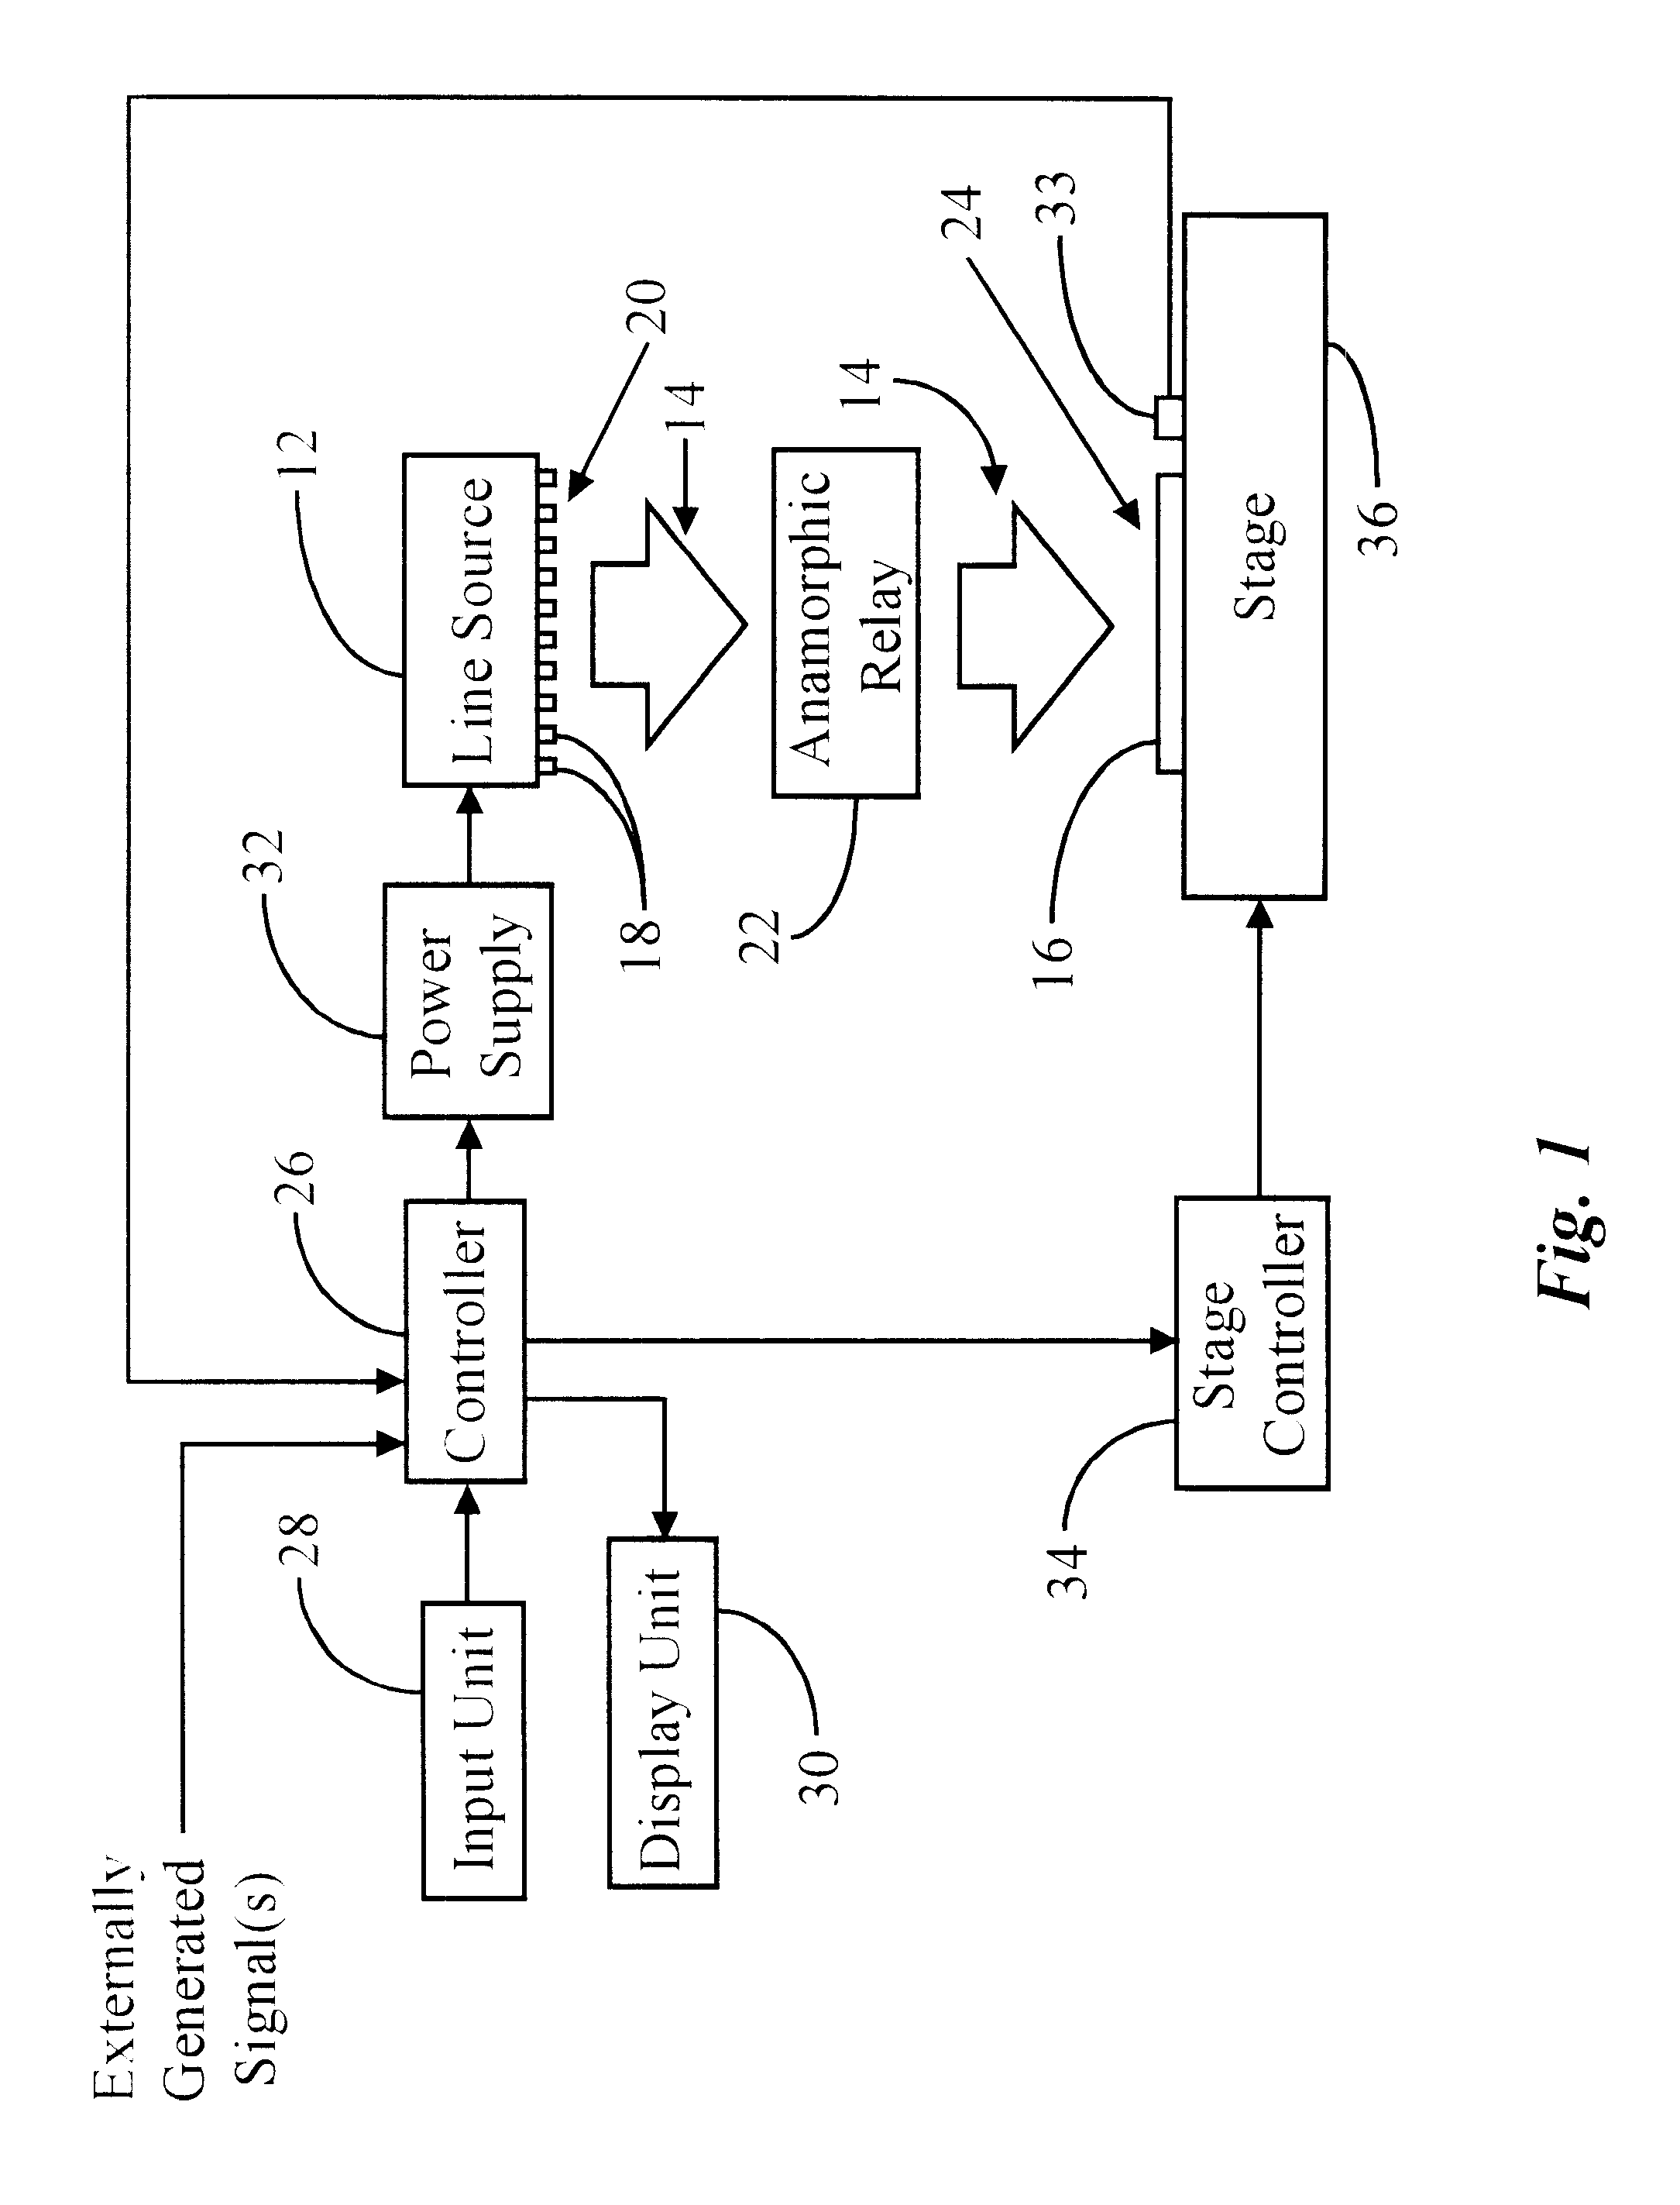 Apparatus having line source of radiant energy for exposing a substrate